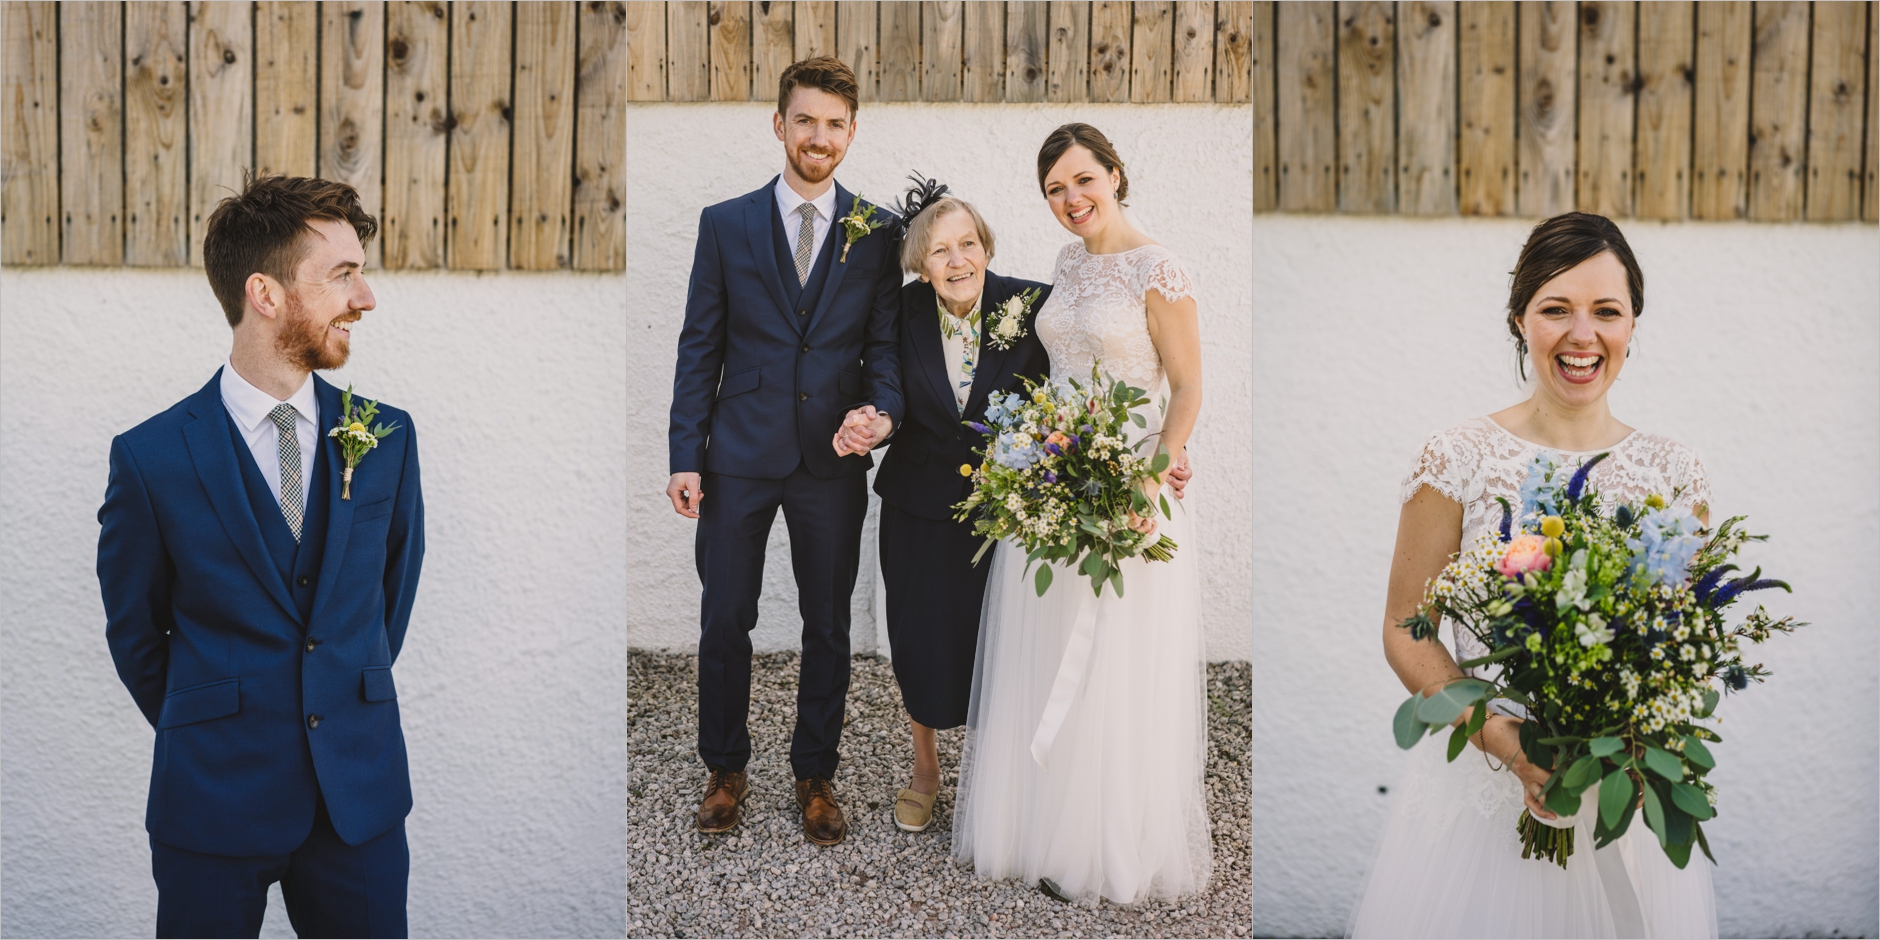 portraits of the bride and groom serarately and together with grandma at their knipe hall wedding in the lake district